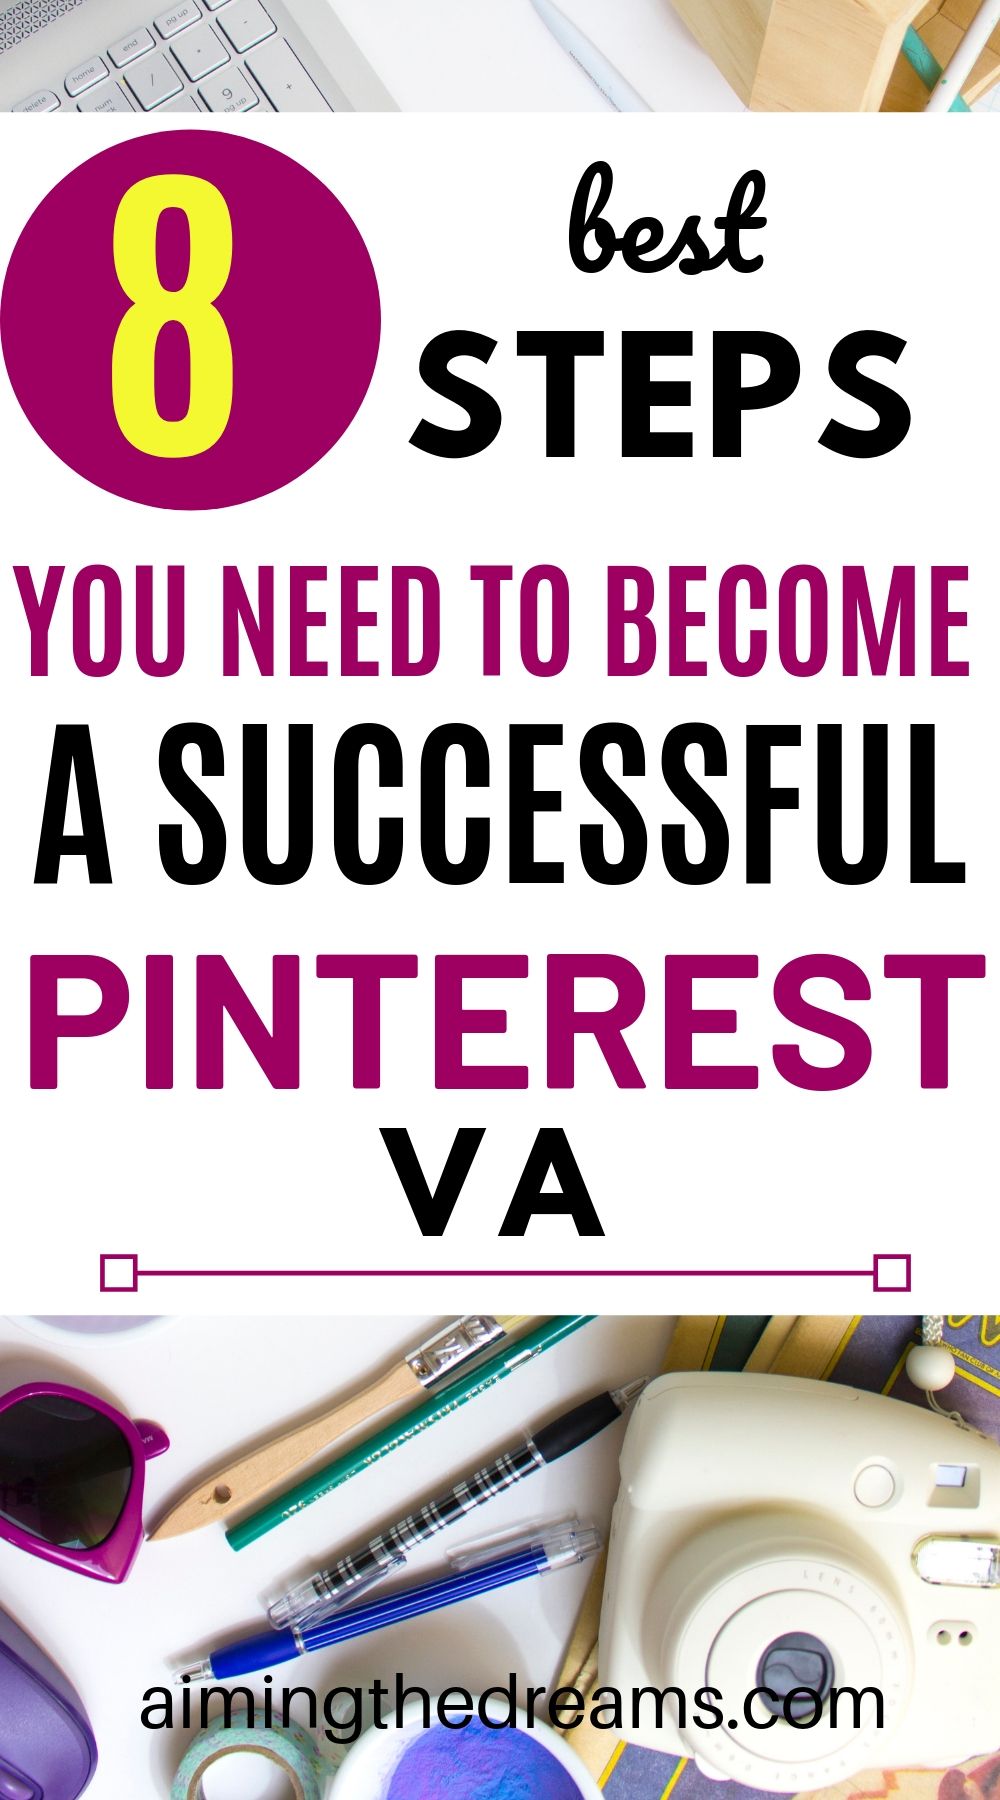 How to become a Pinterest VA